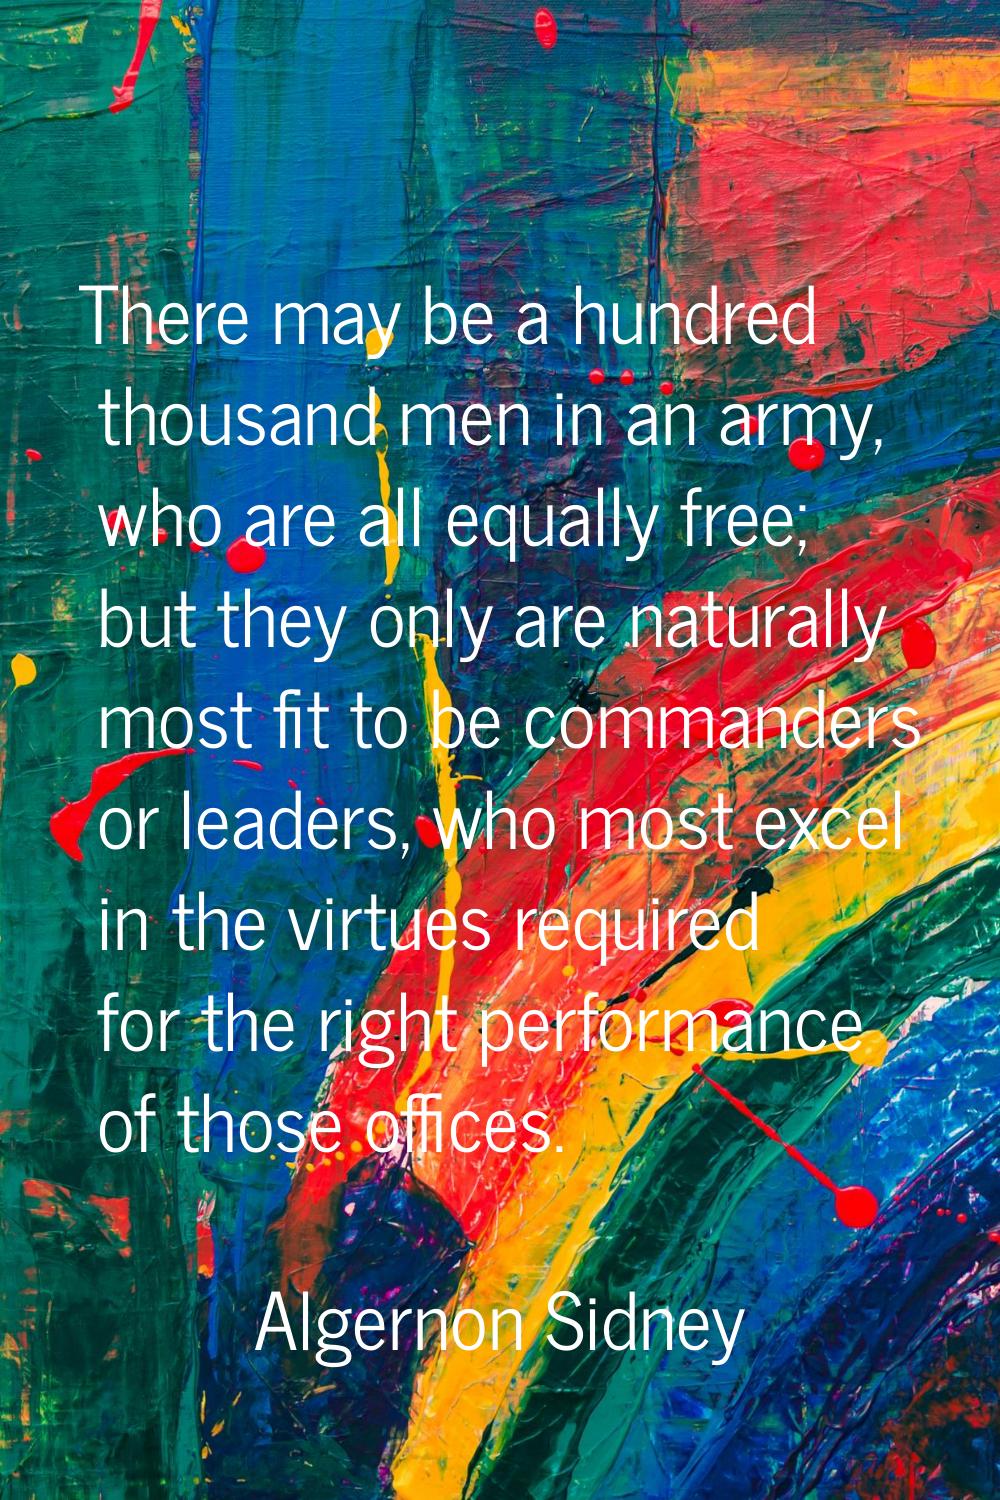 There may be a hundred thousand men in an army, who are all equally free; but they only are natural